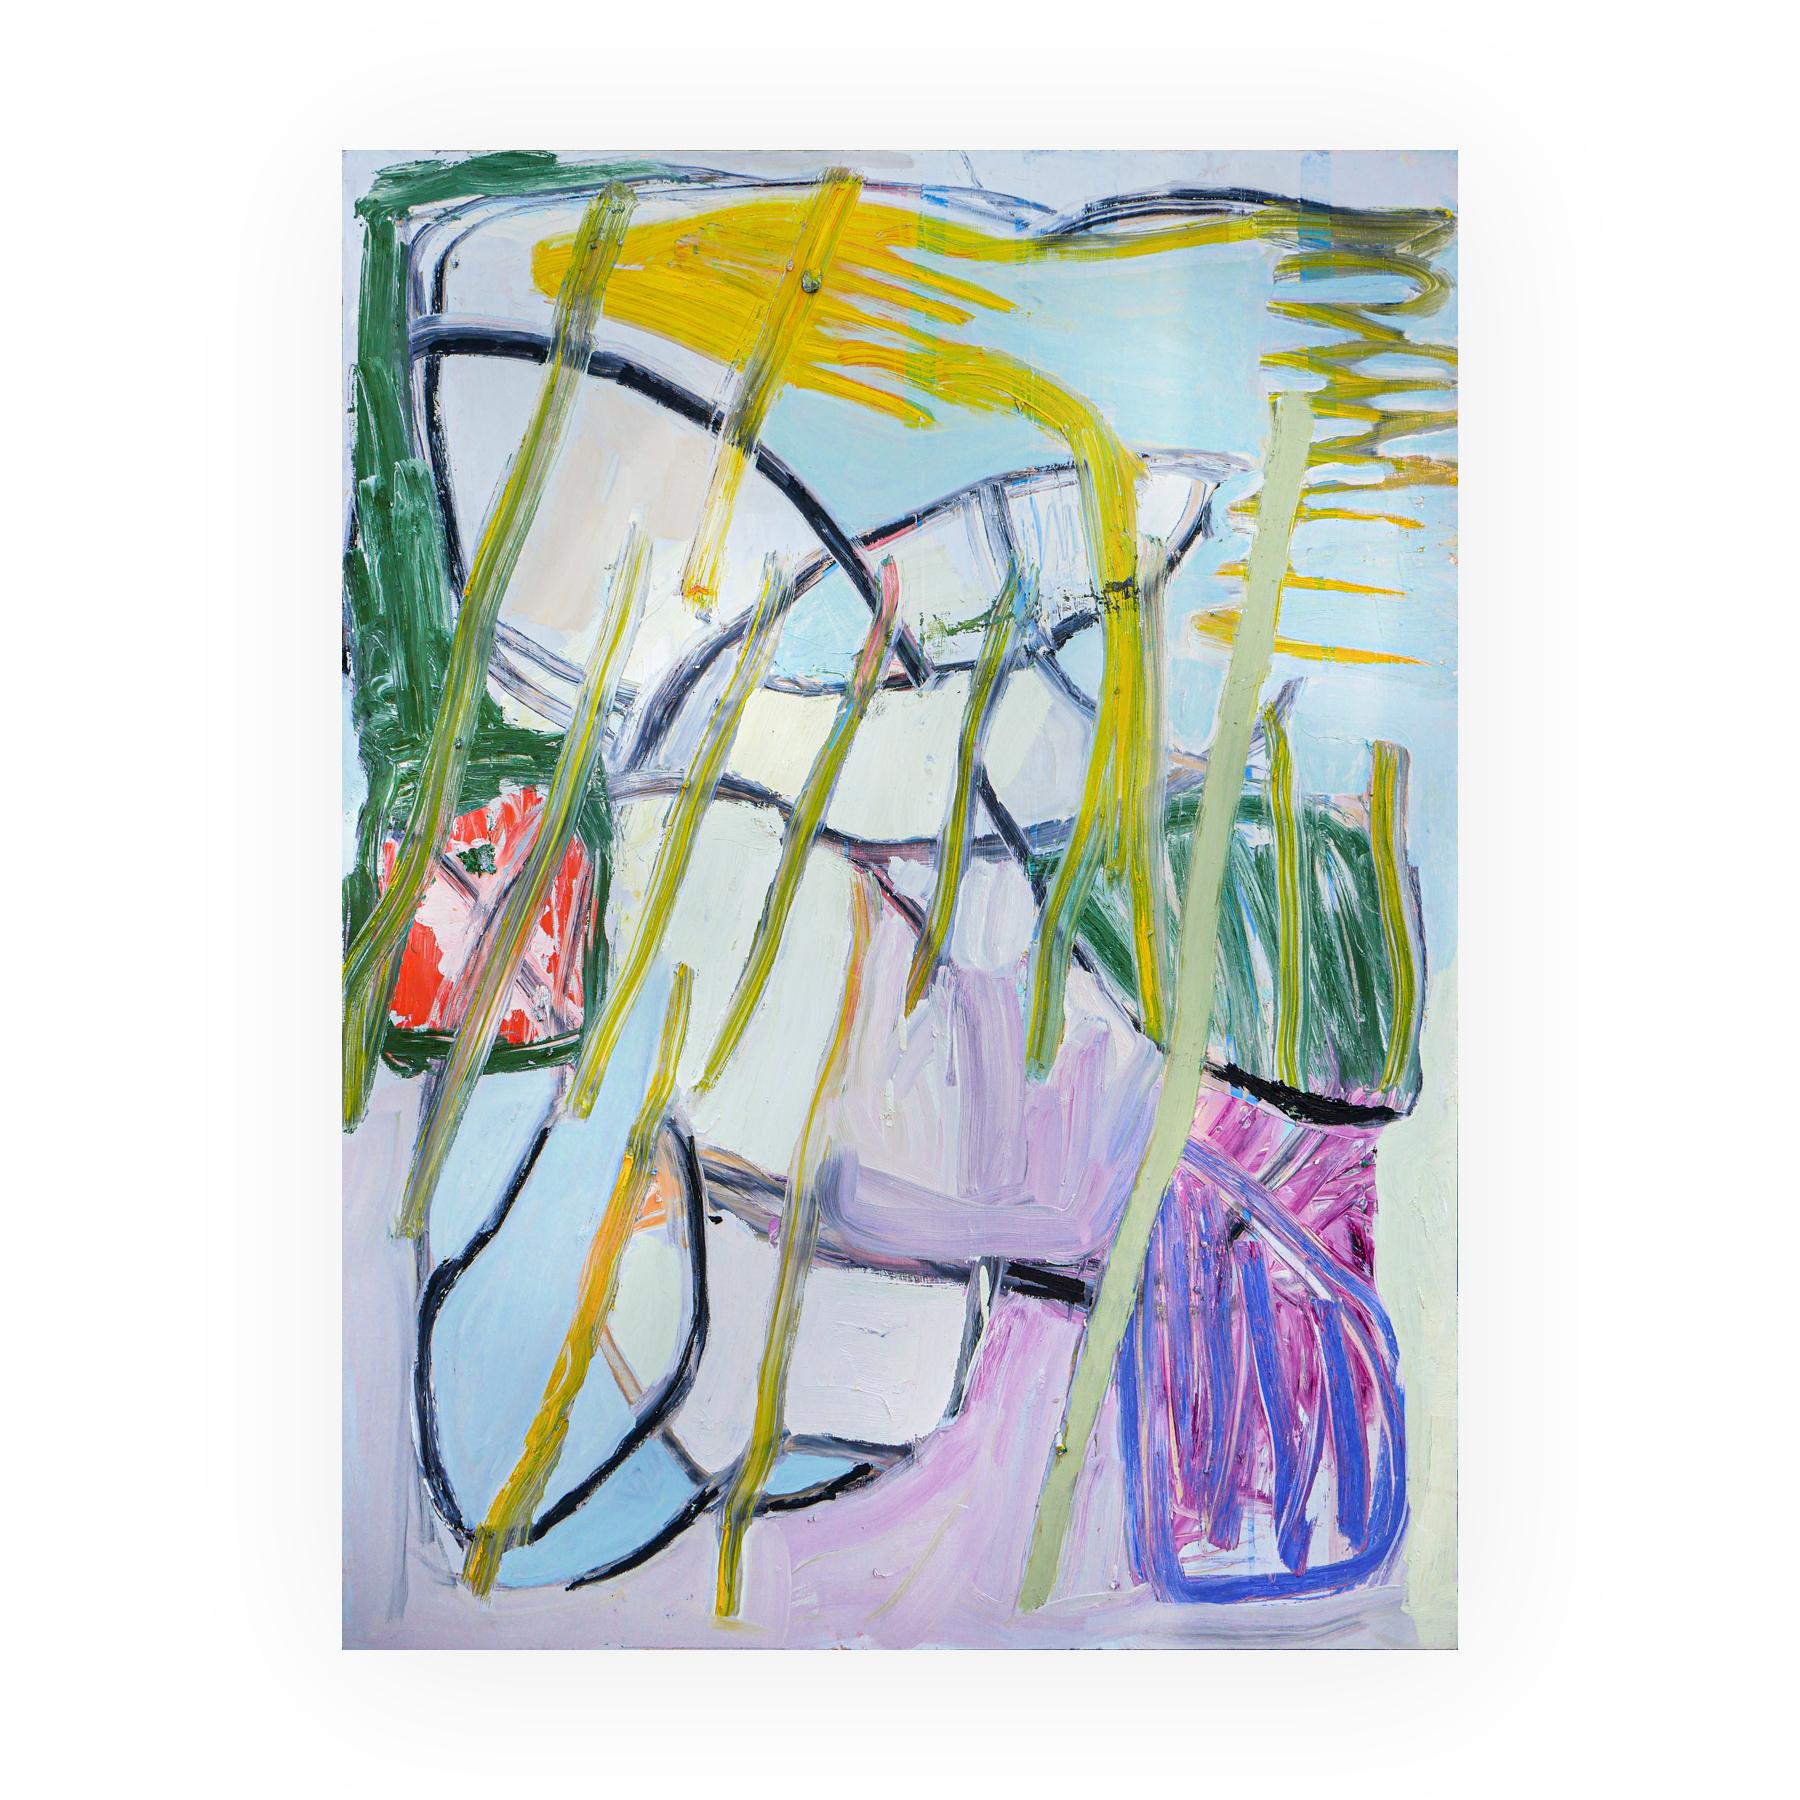 Contemporary colorful pastel abstract painting by local Houston artist Benji Stiles. The painting depicts pastel purple, blue, dark green, and a bright yellow streak. Unframed but framing options are available. Signed, titled, and dated by the